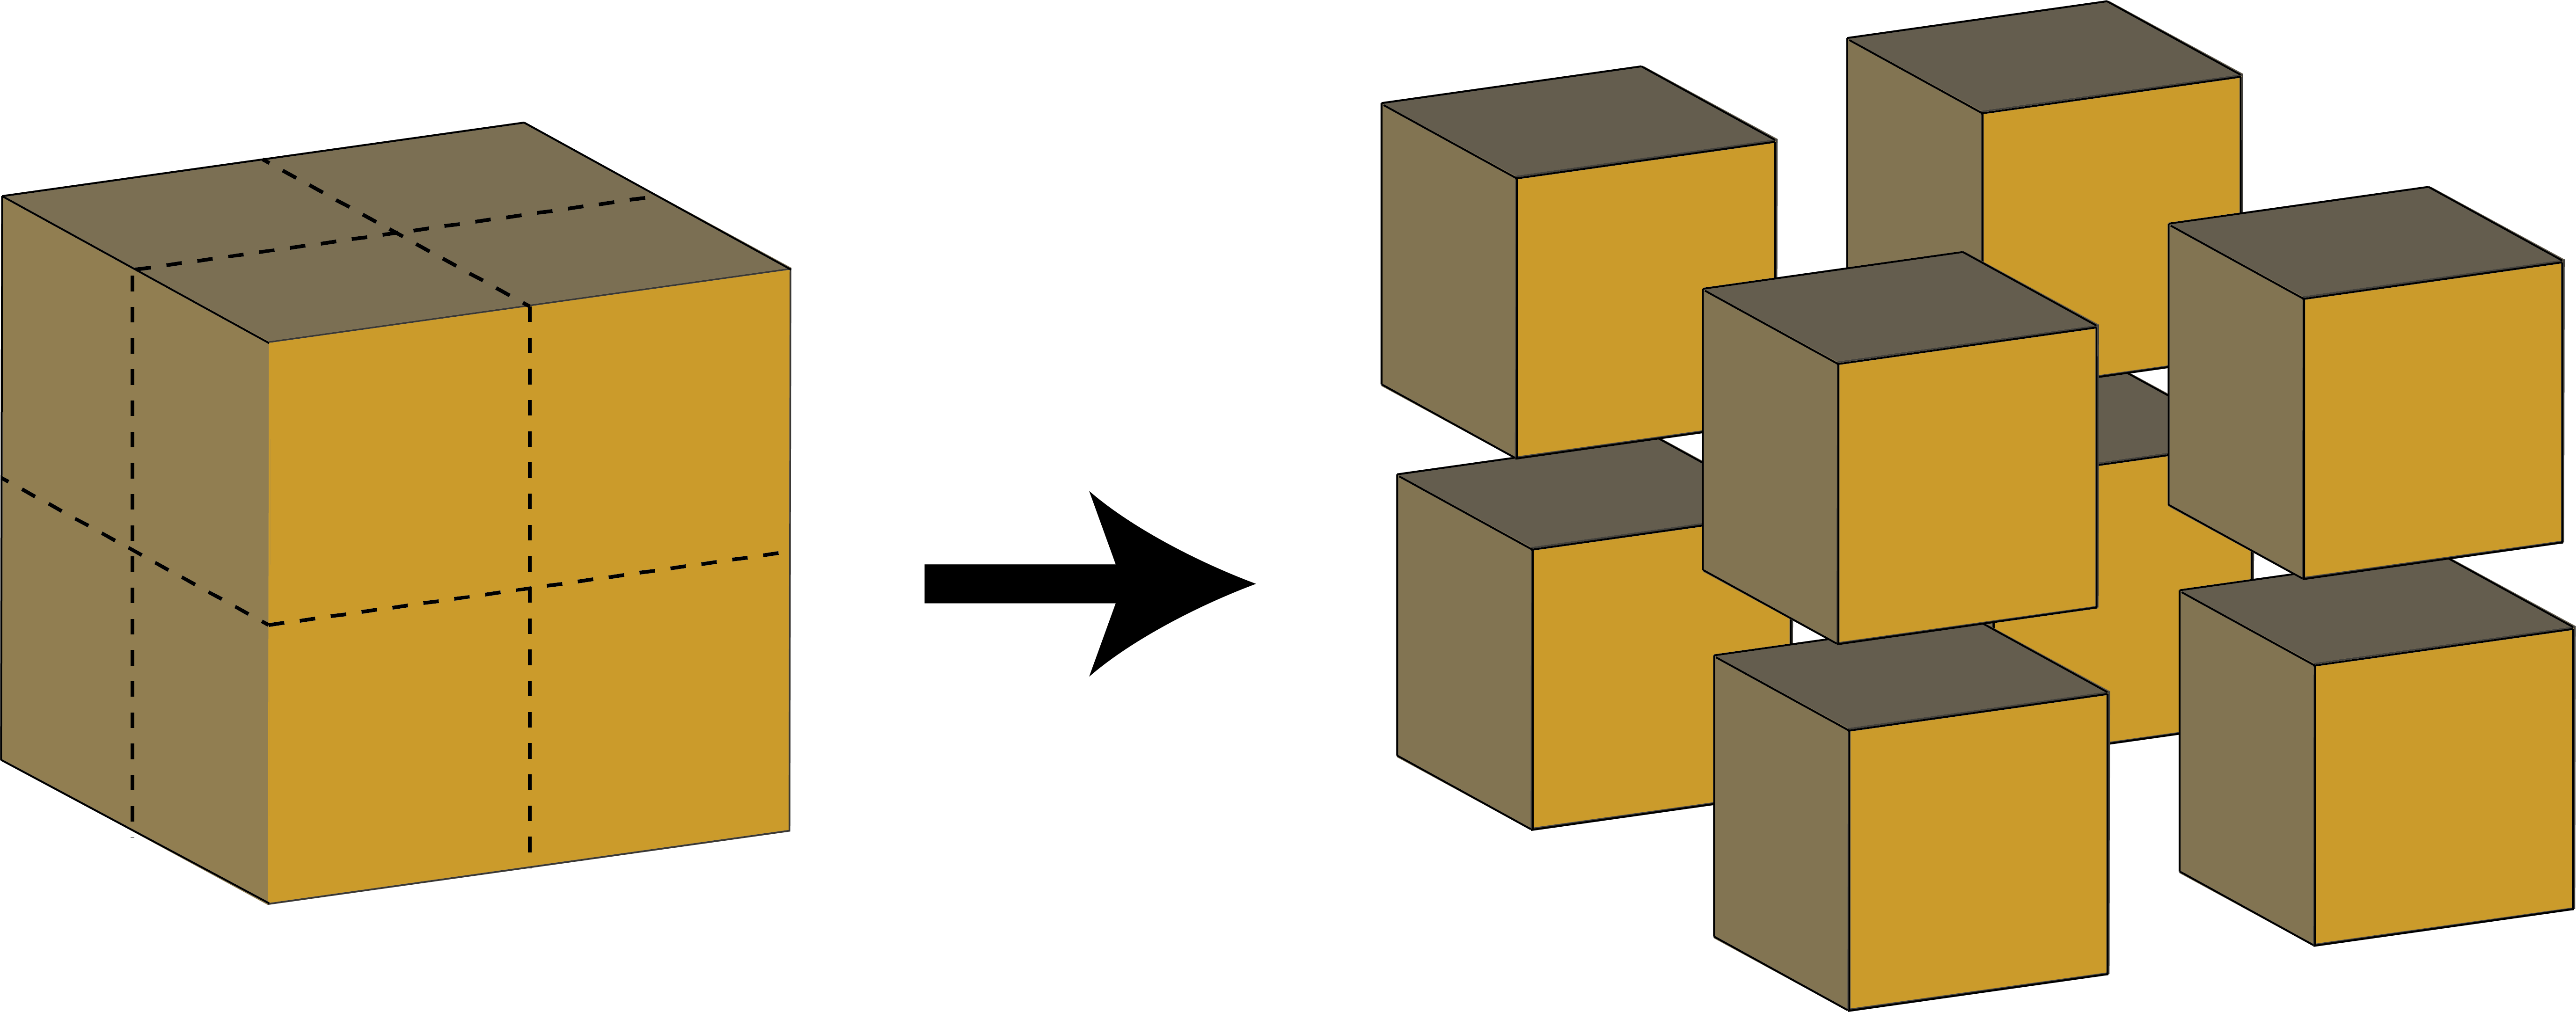 A horizontal cut divides the original cube into a top half and a bottom half. Two perpendicular vertical cuts then divide each half into four identical cubes.